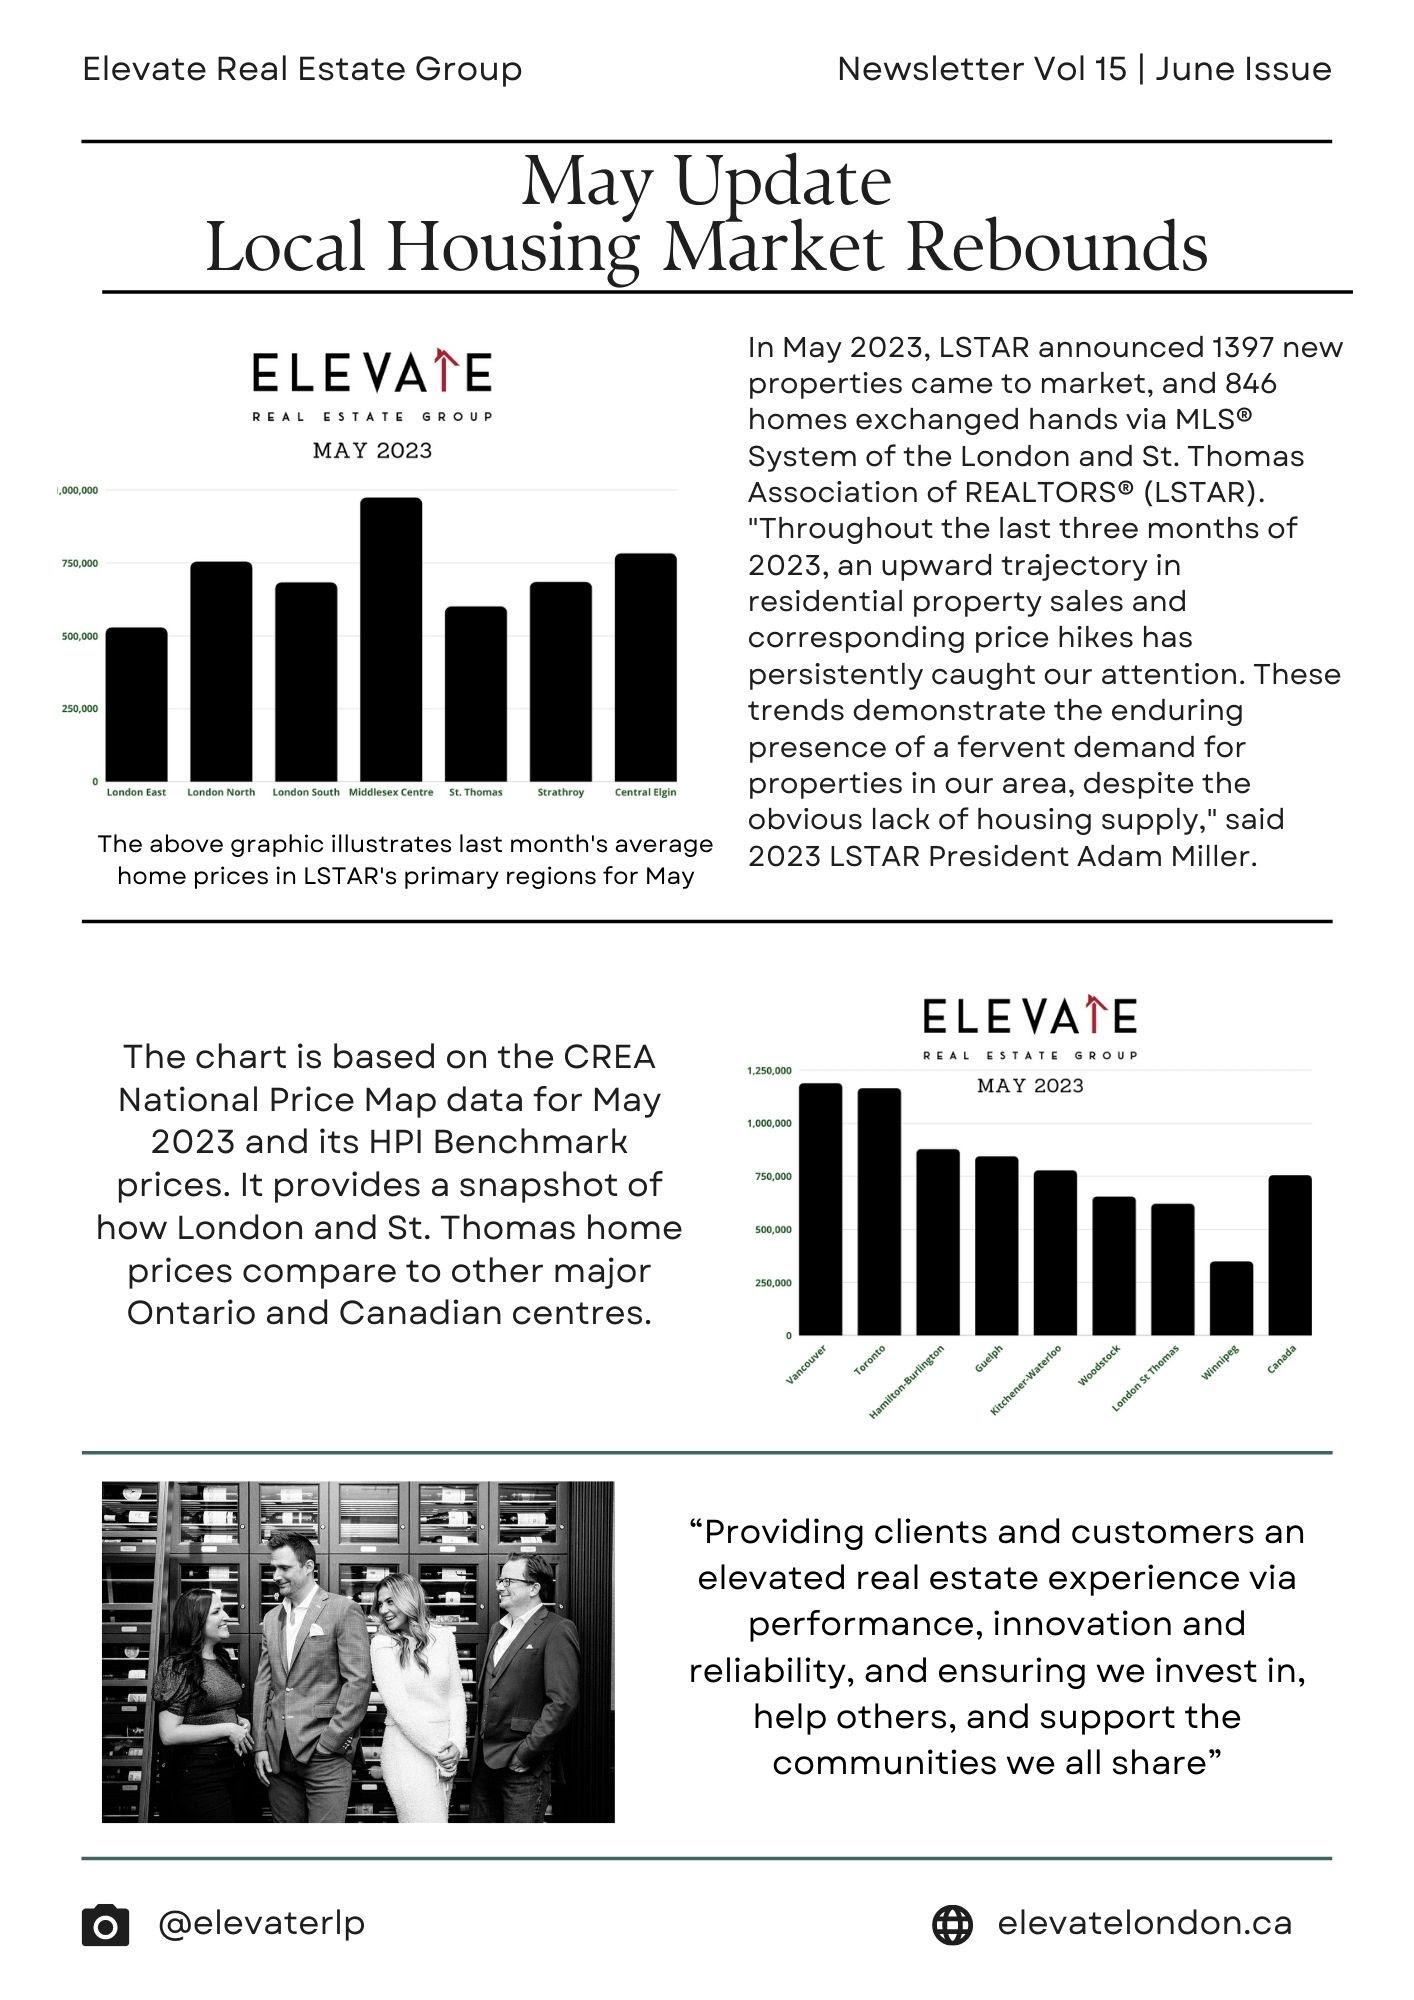 Elevate Real Estate Group – May 2023 Market Update